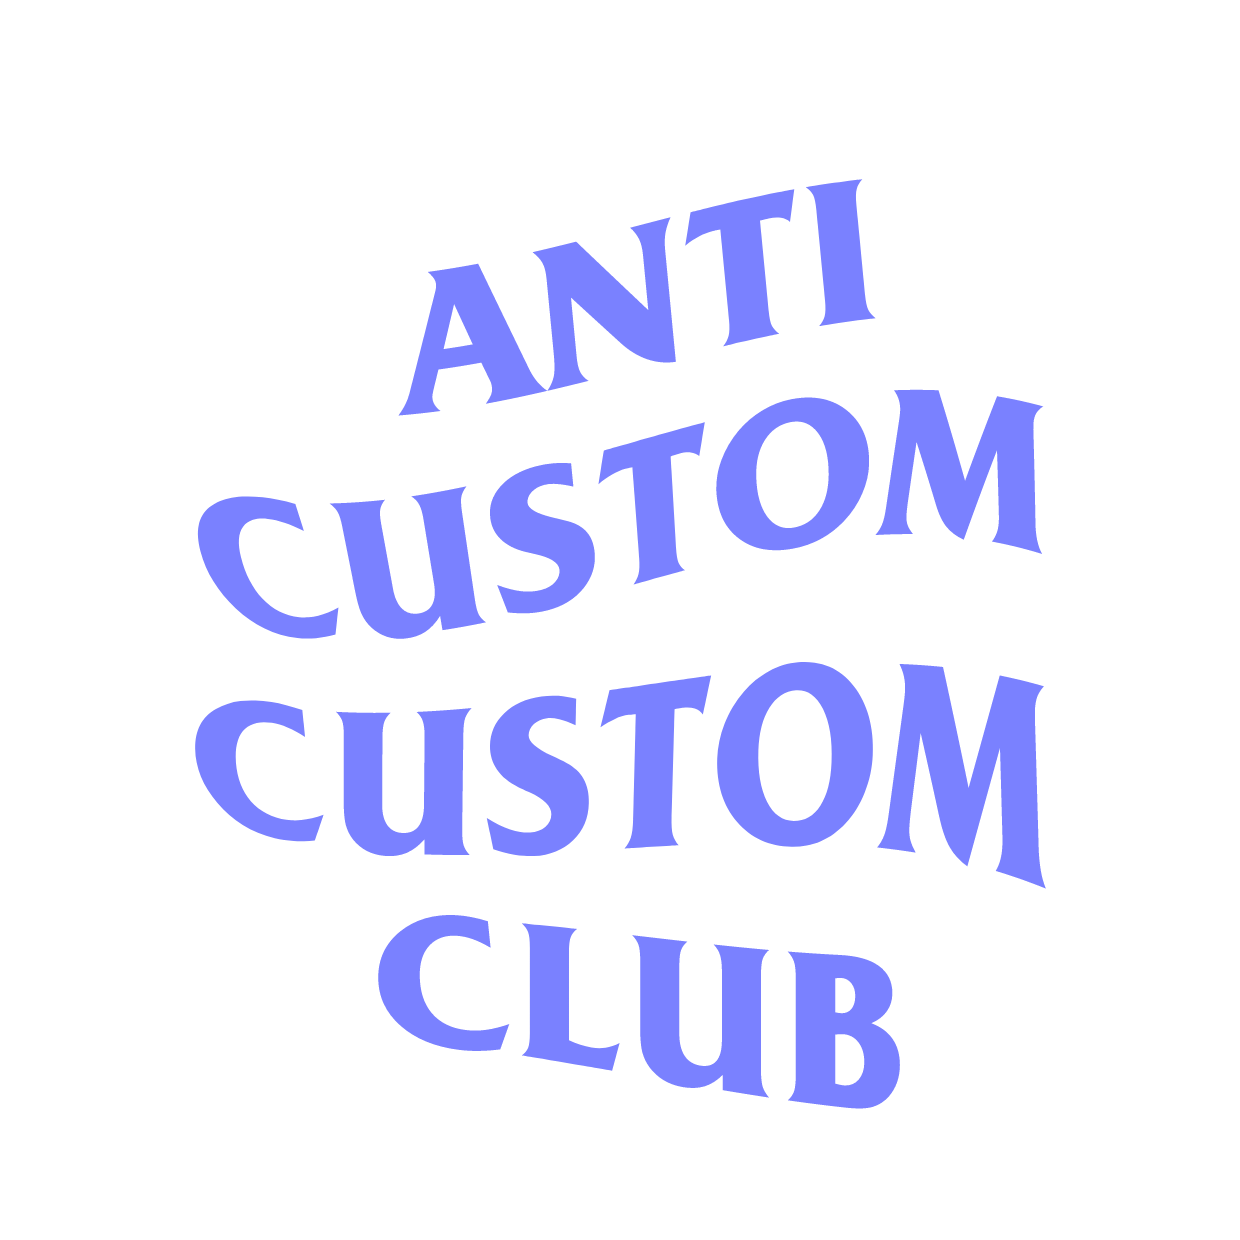 Anti Custom Club - ASSC Logo Generator - Product Information, Latest  Updates, and Reviews 2023 | Product Hunt